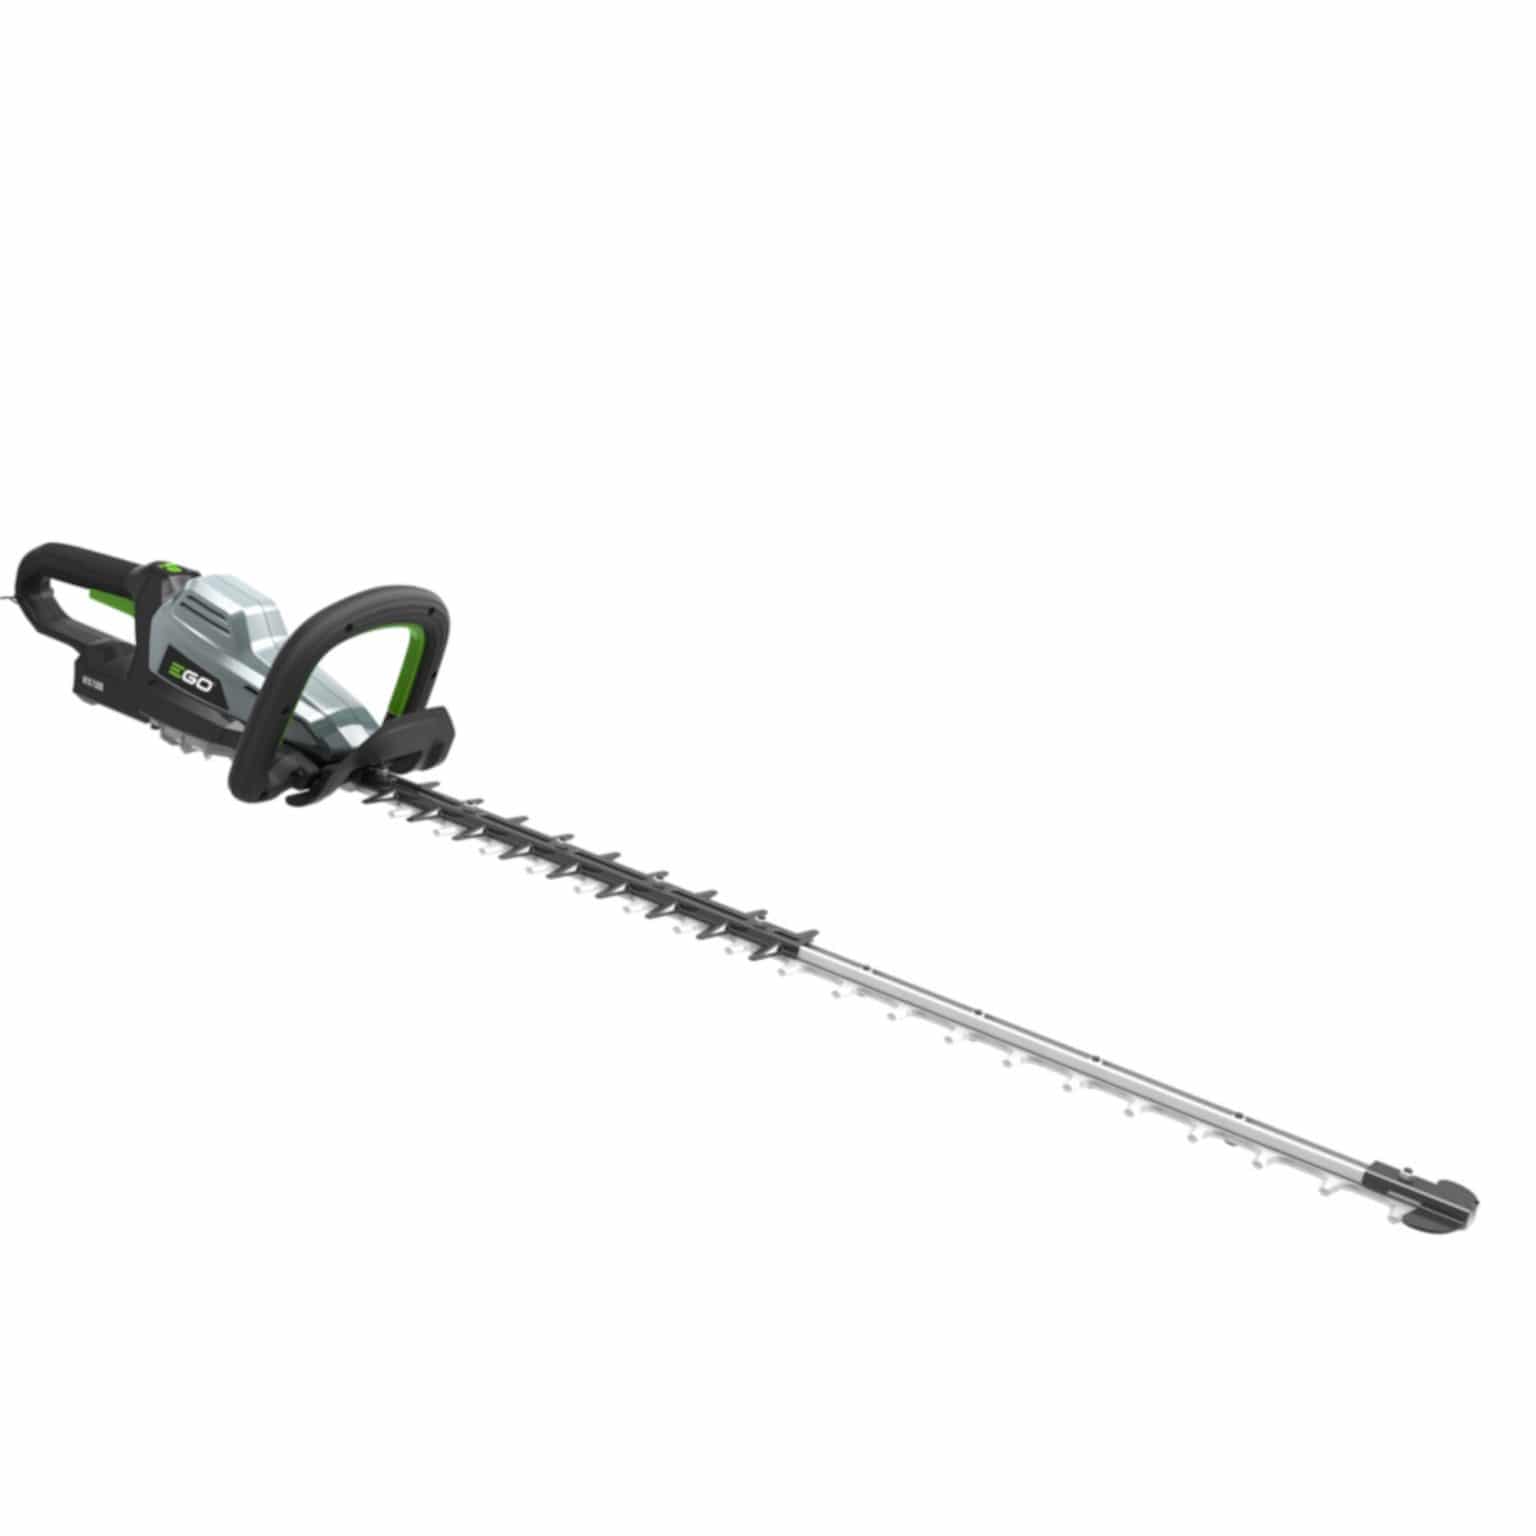 EGO HTX7500 Battery Hedge Trimmer